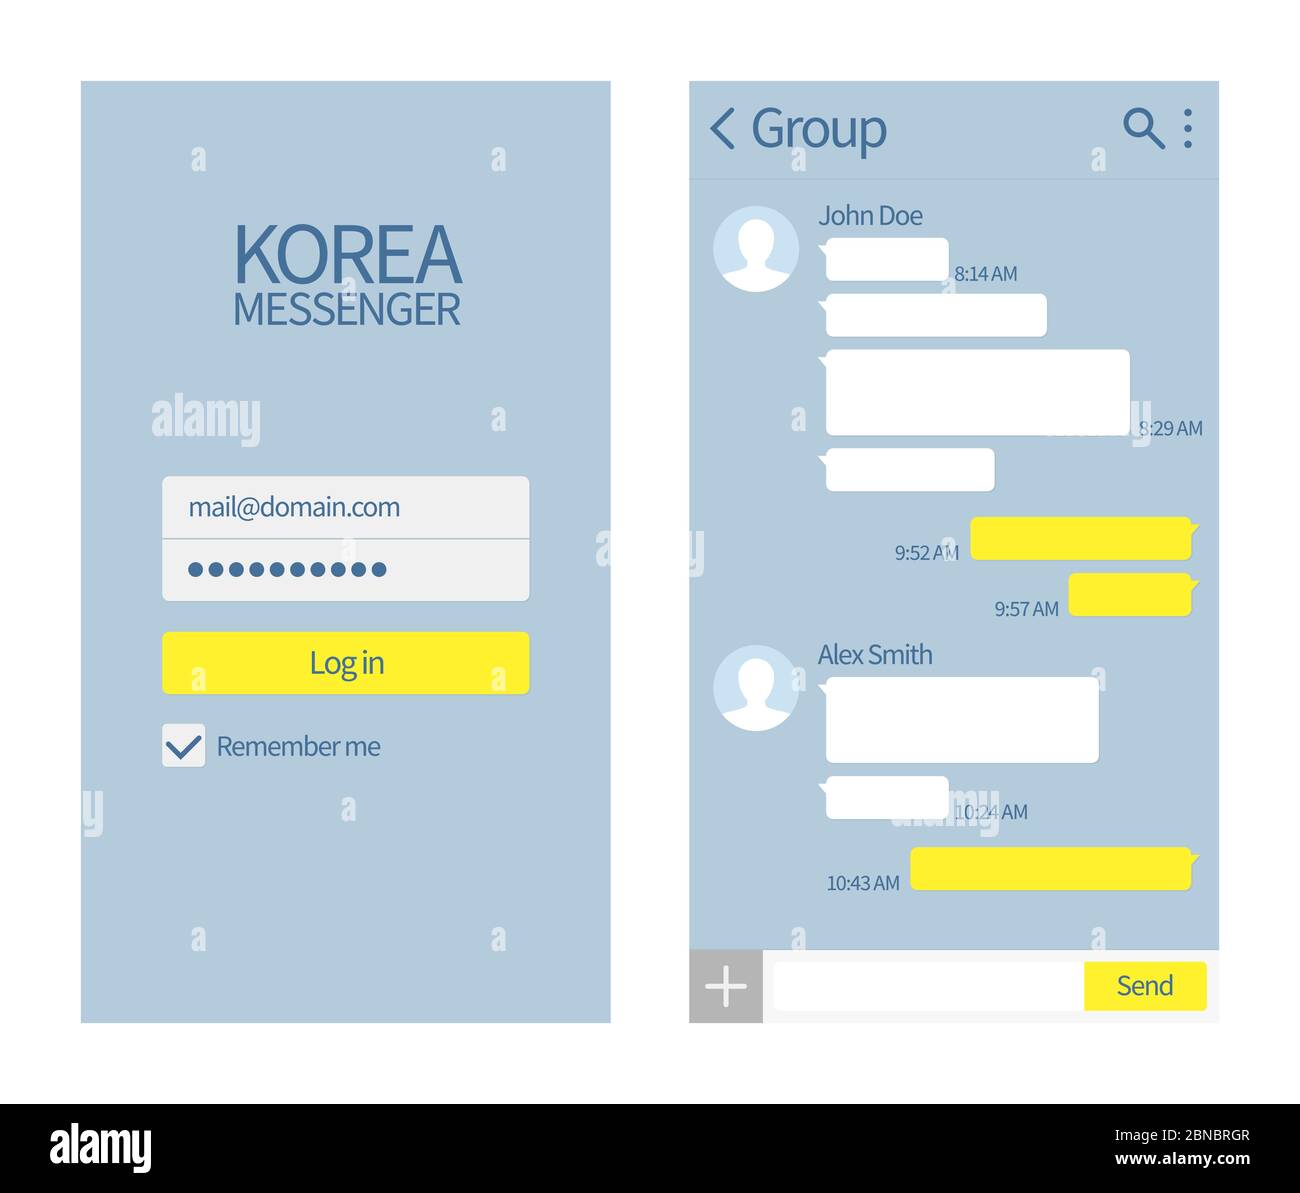 Korean messenger. Kakao talk interface with chat boxes and icons vector message template. Illustration of message phone, application kakaotalk Stock Vector